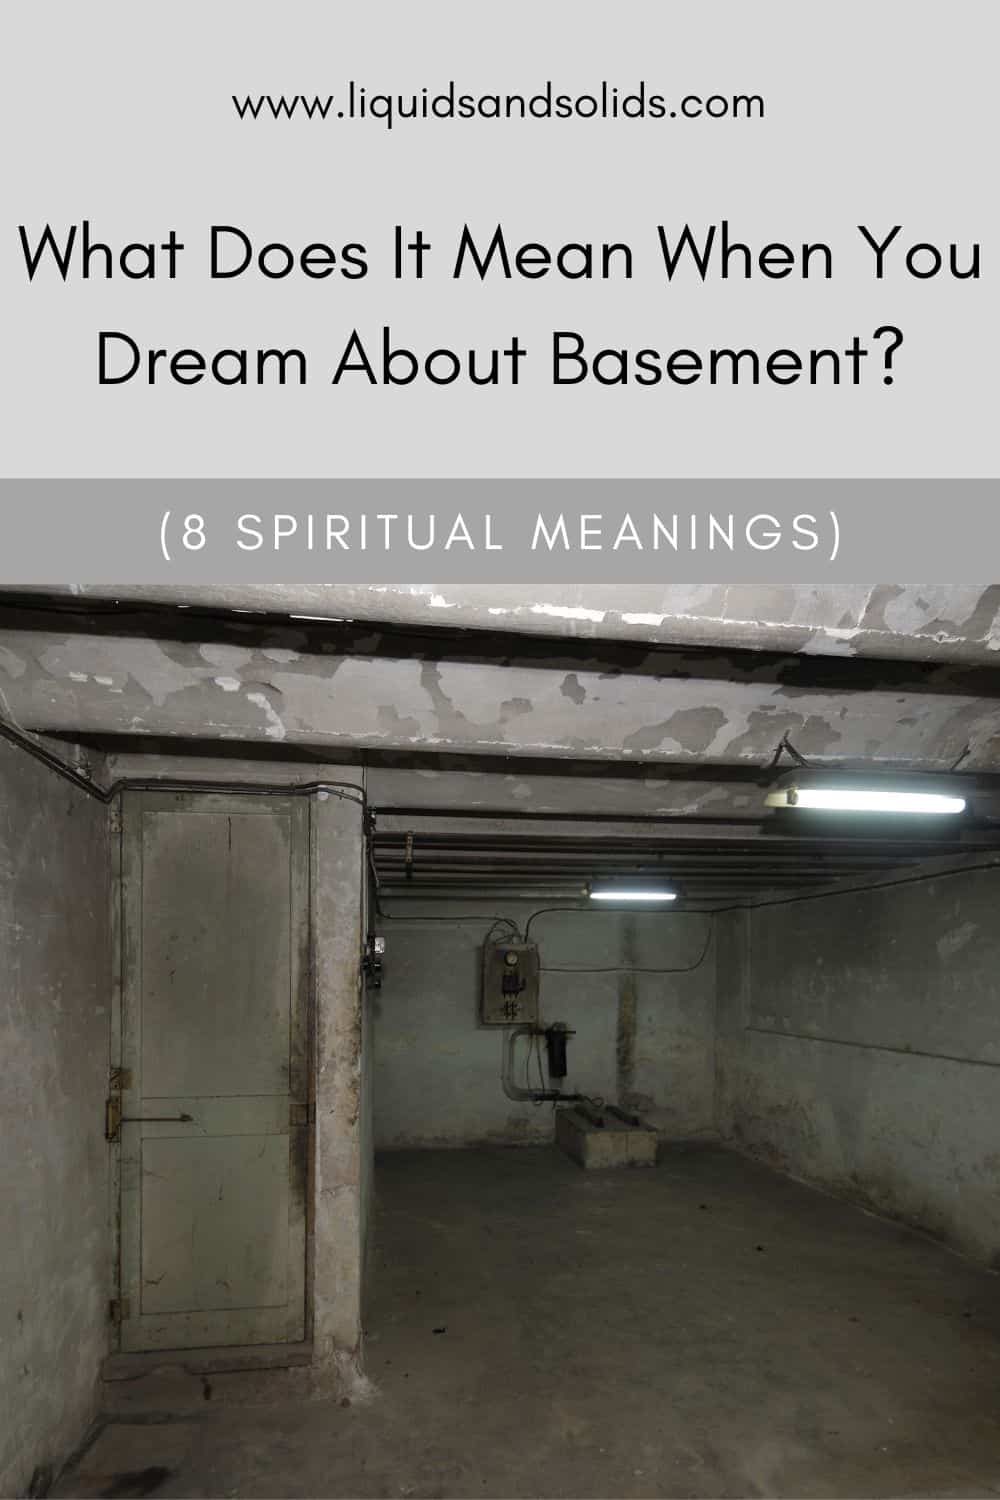 What Does It Mean When You Dream About Basement? (8 Spiritual Meanings)